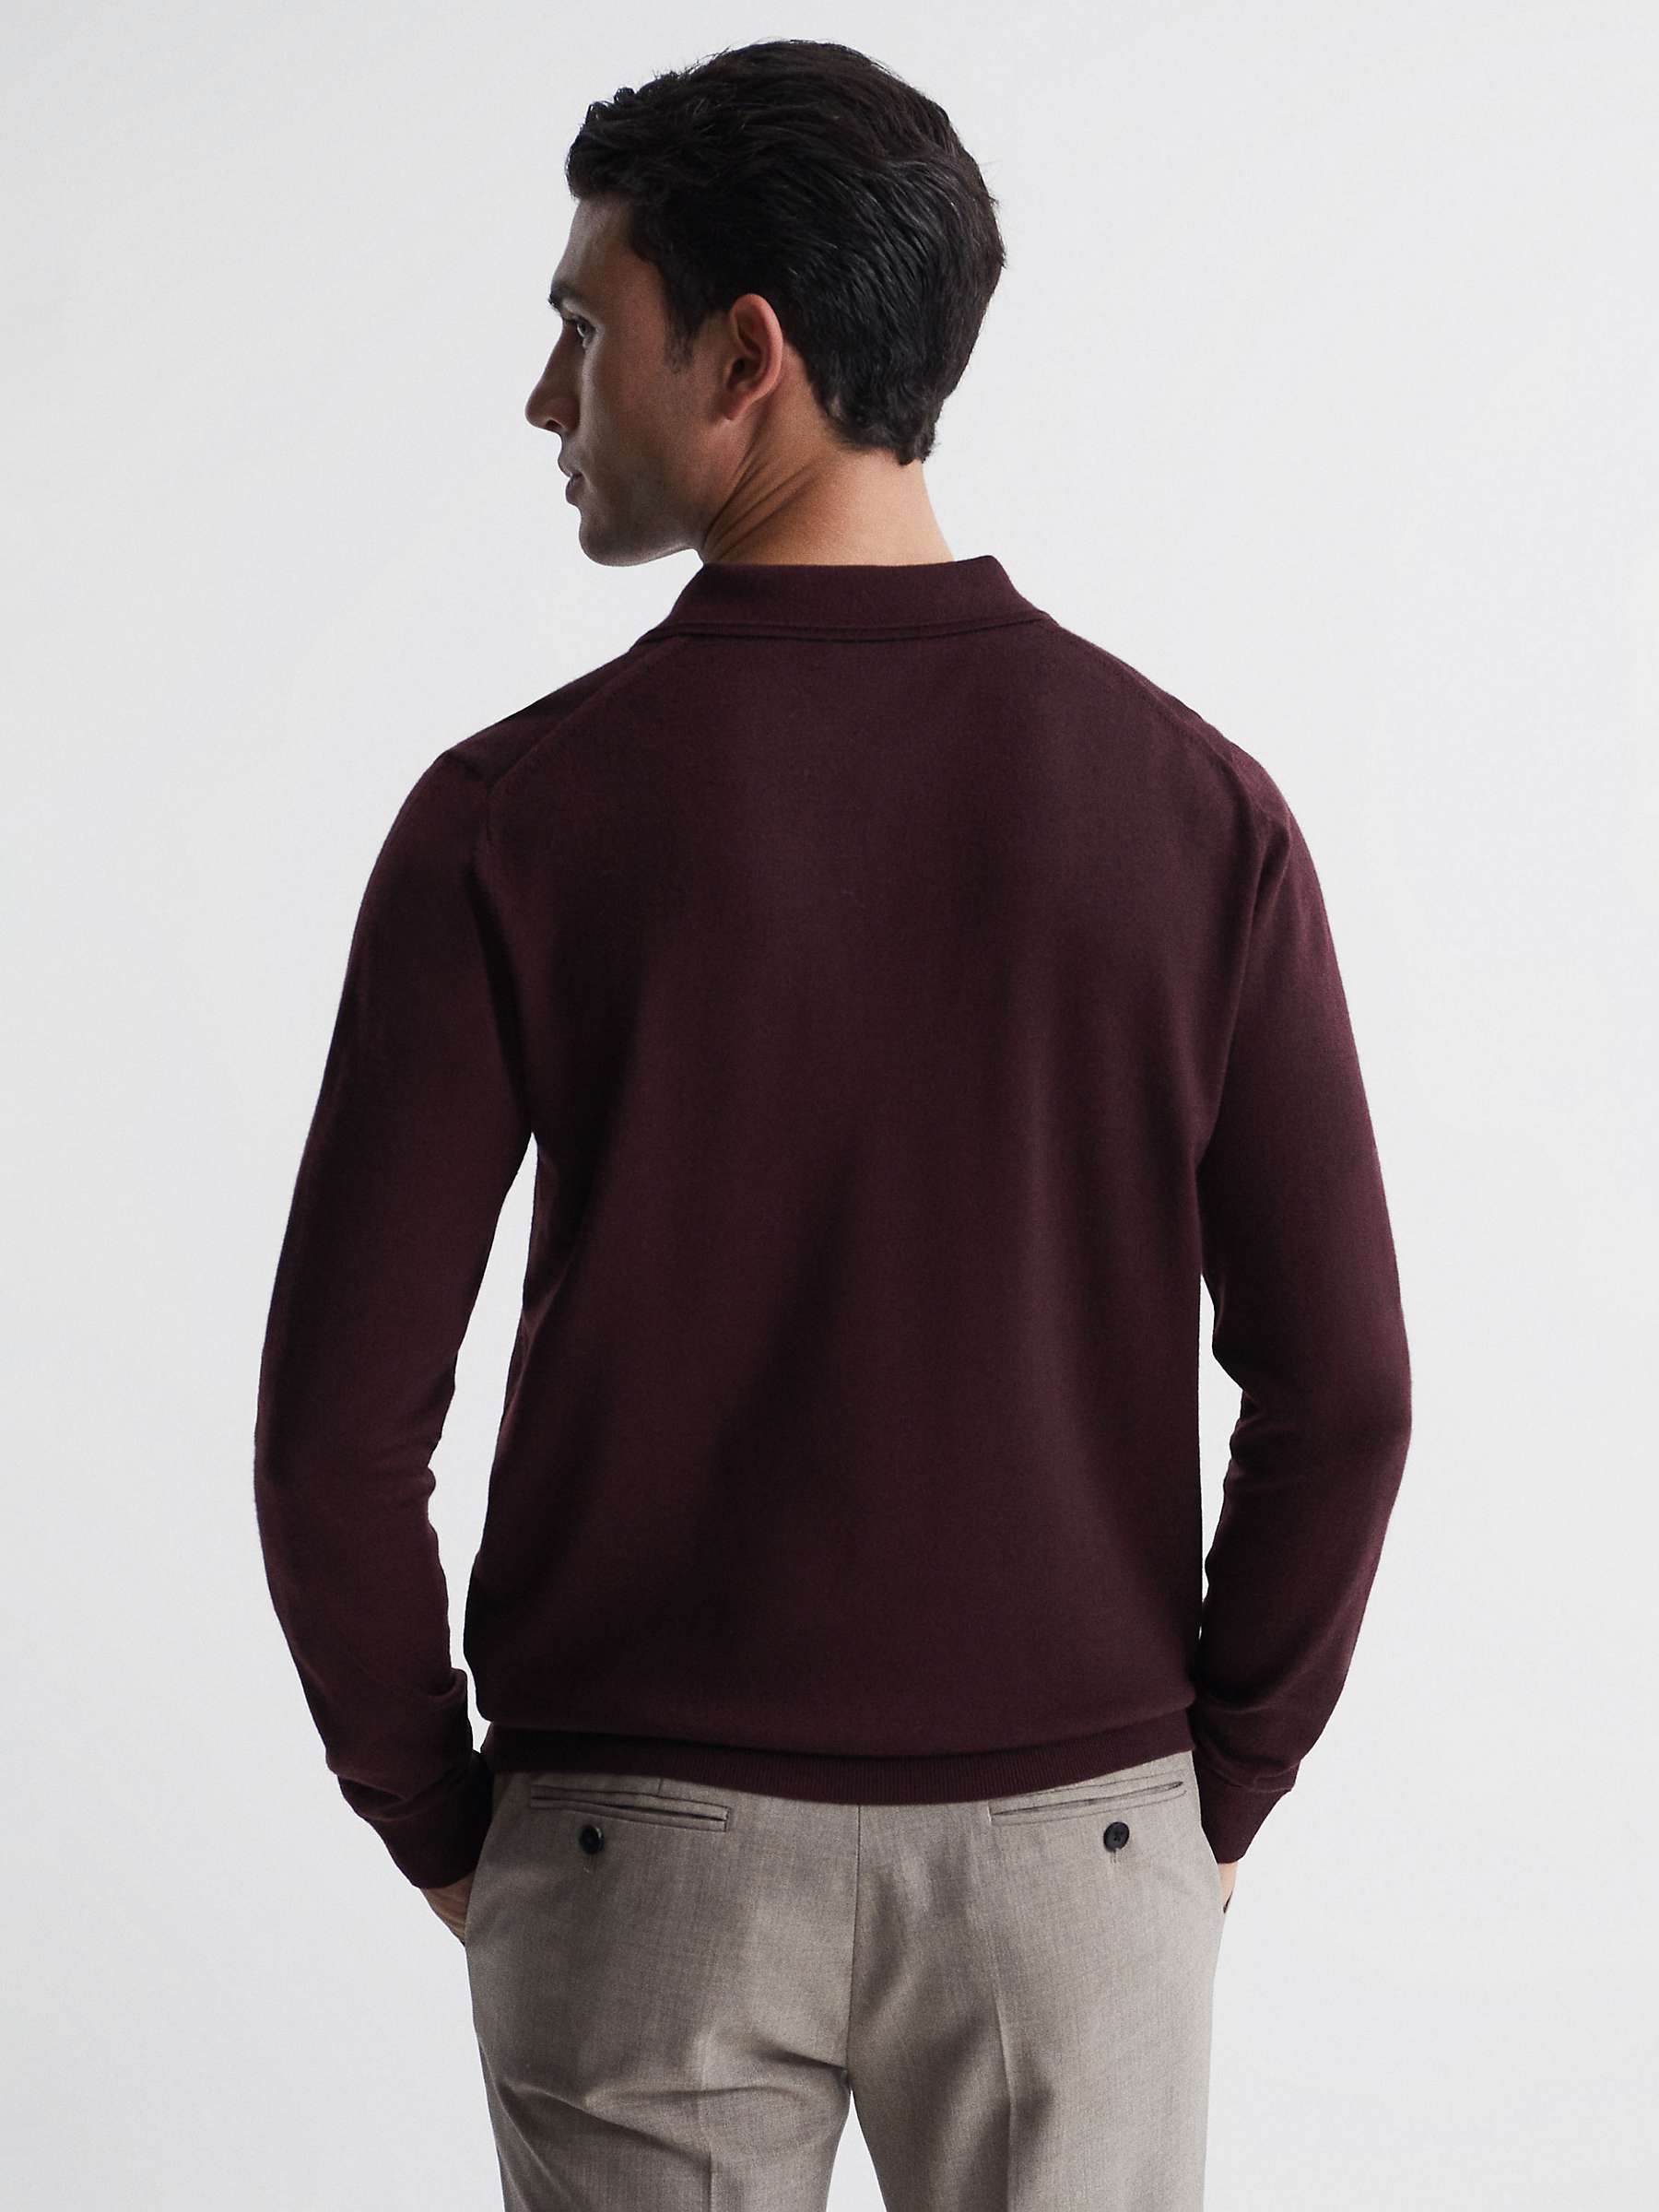 Buy Reiss Trafford Knitted Wool Long Sleeve Polo Top Online at johnlewis.com